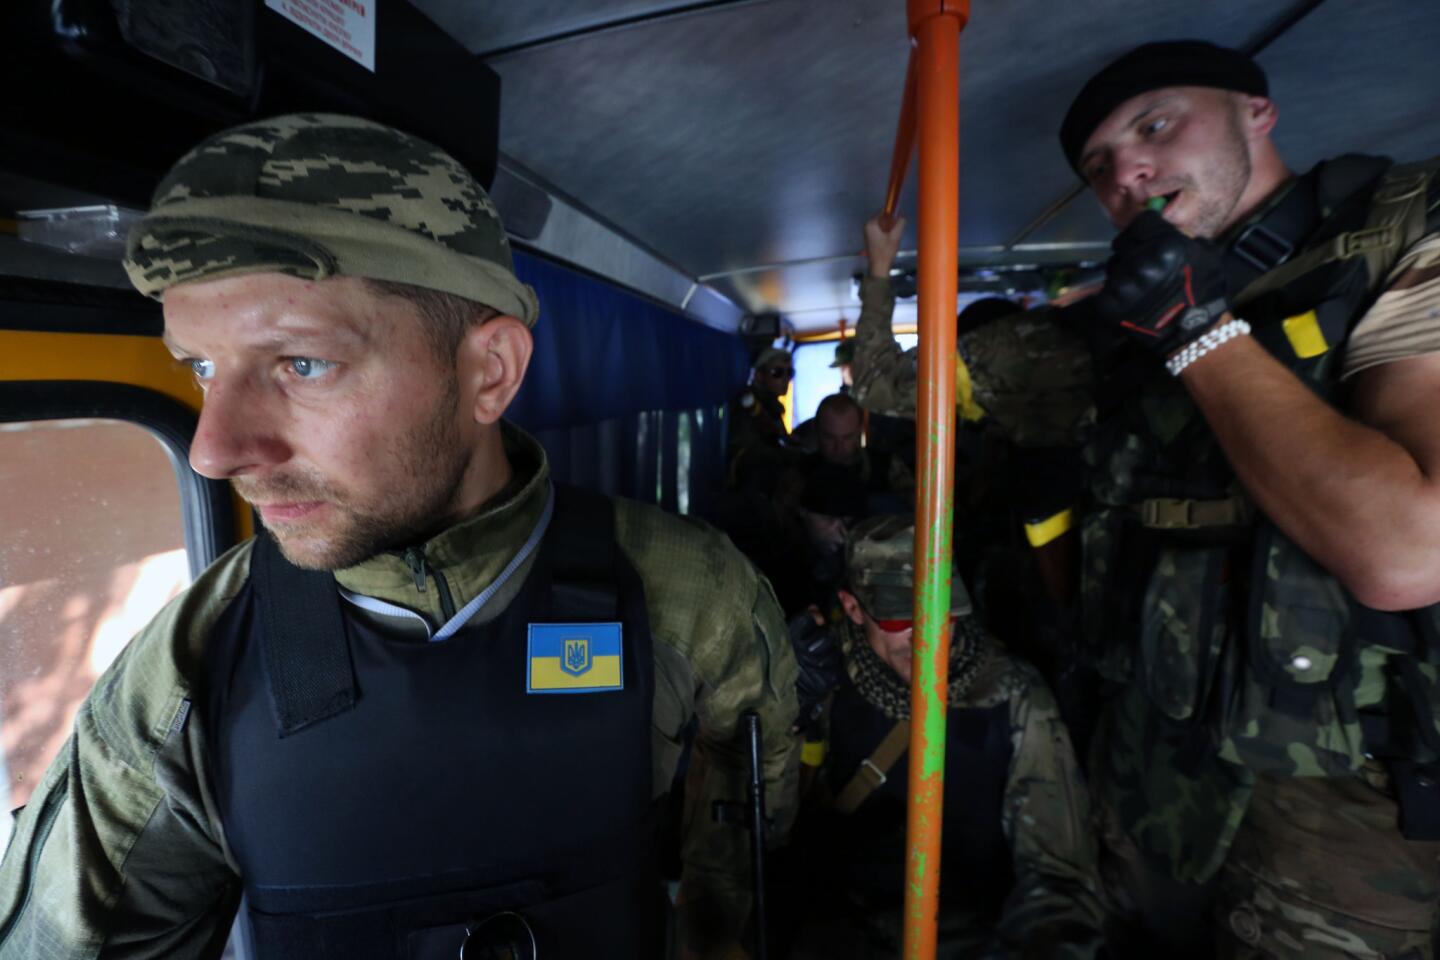 A Ukrainian commando unit heads back to base after a mopping-up raid in Slovyansk.